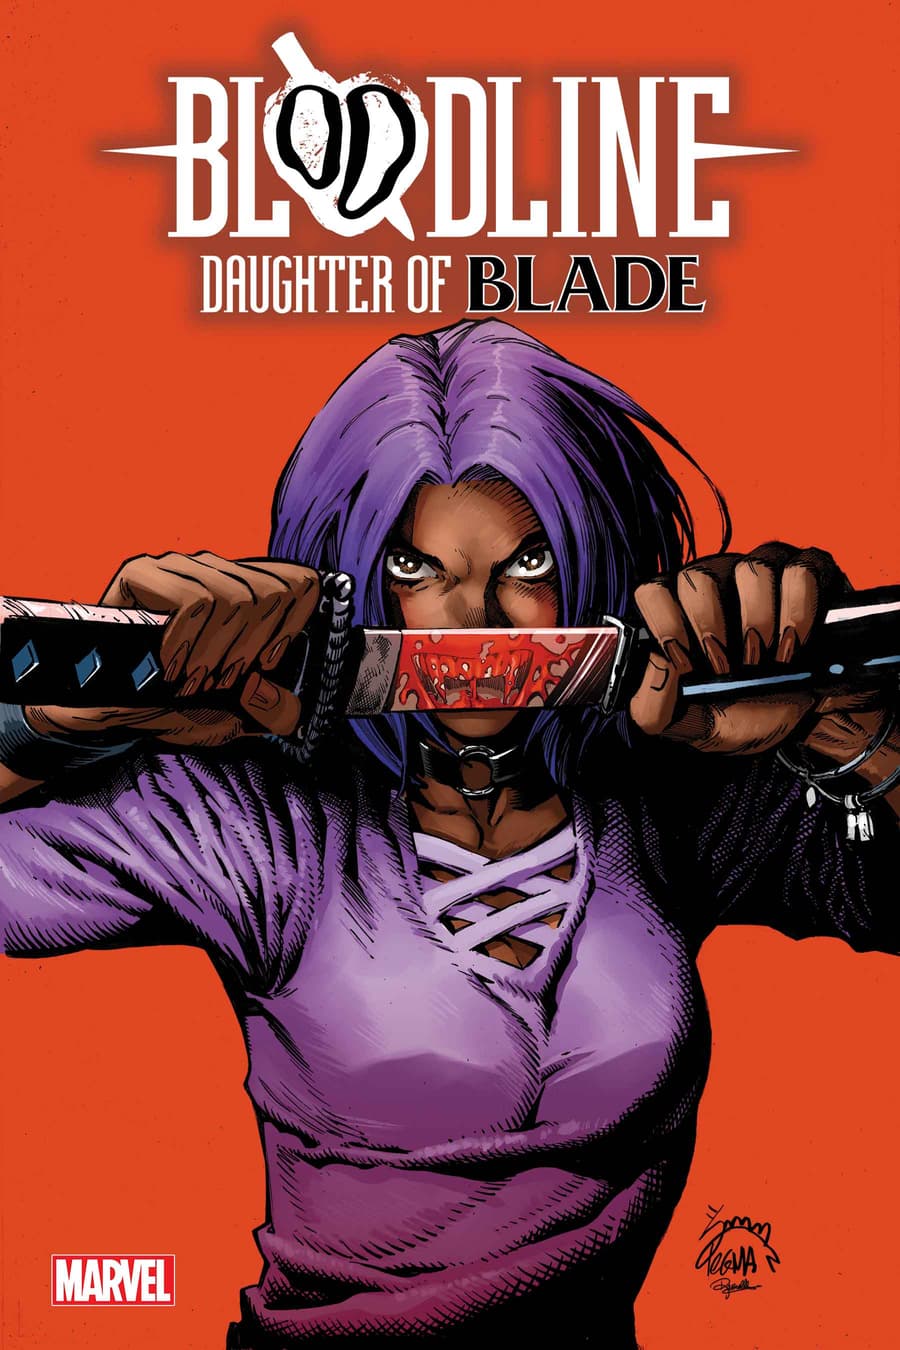 BLOODLINE: DAUGHTER OF BLADE #1 variant cover by Ryan Stegman